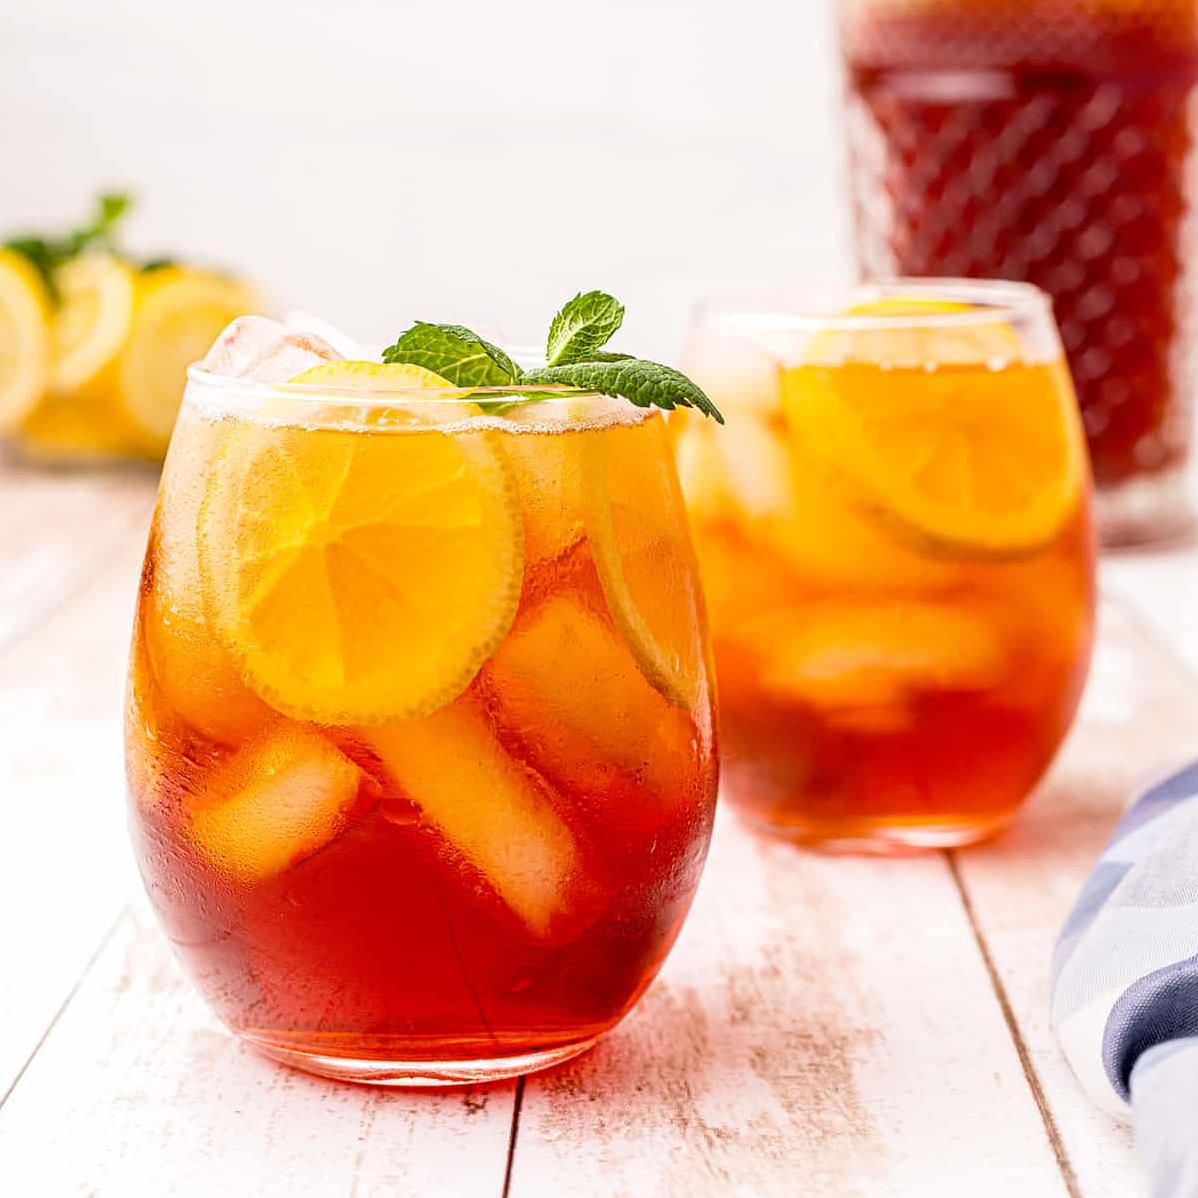  Nothing beats a refreshing glass of sweet tea on a hot summer day.